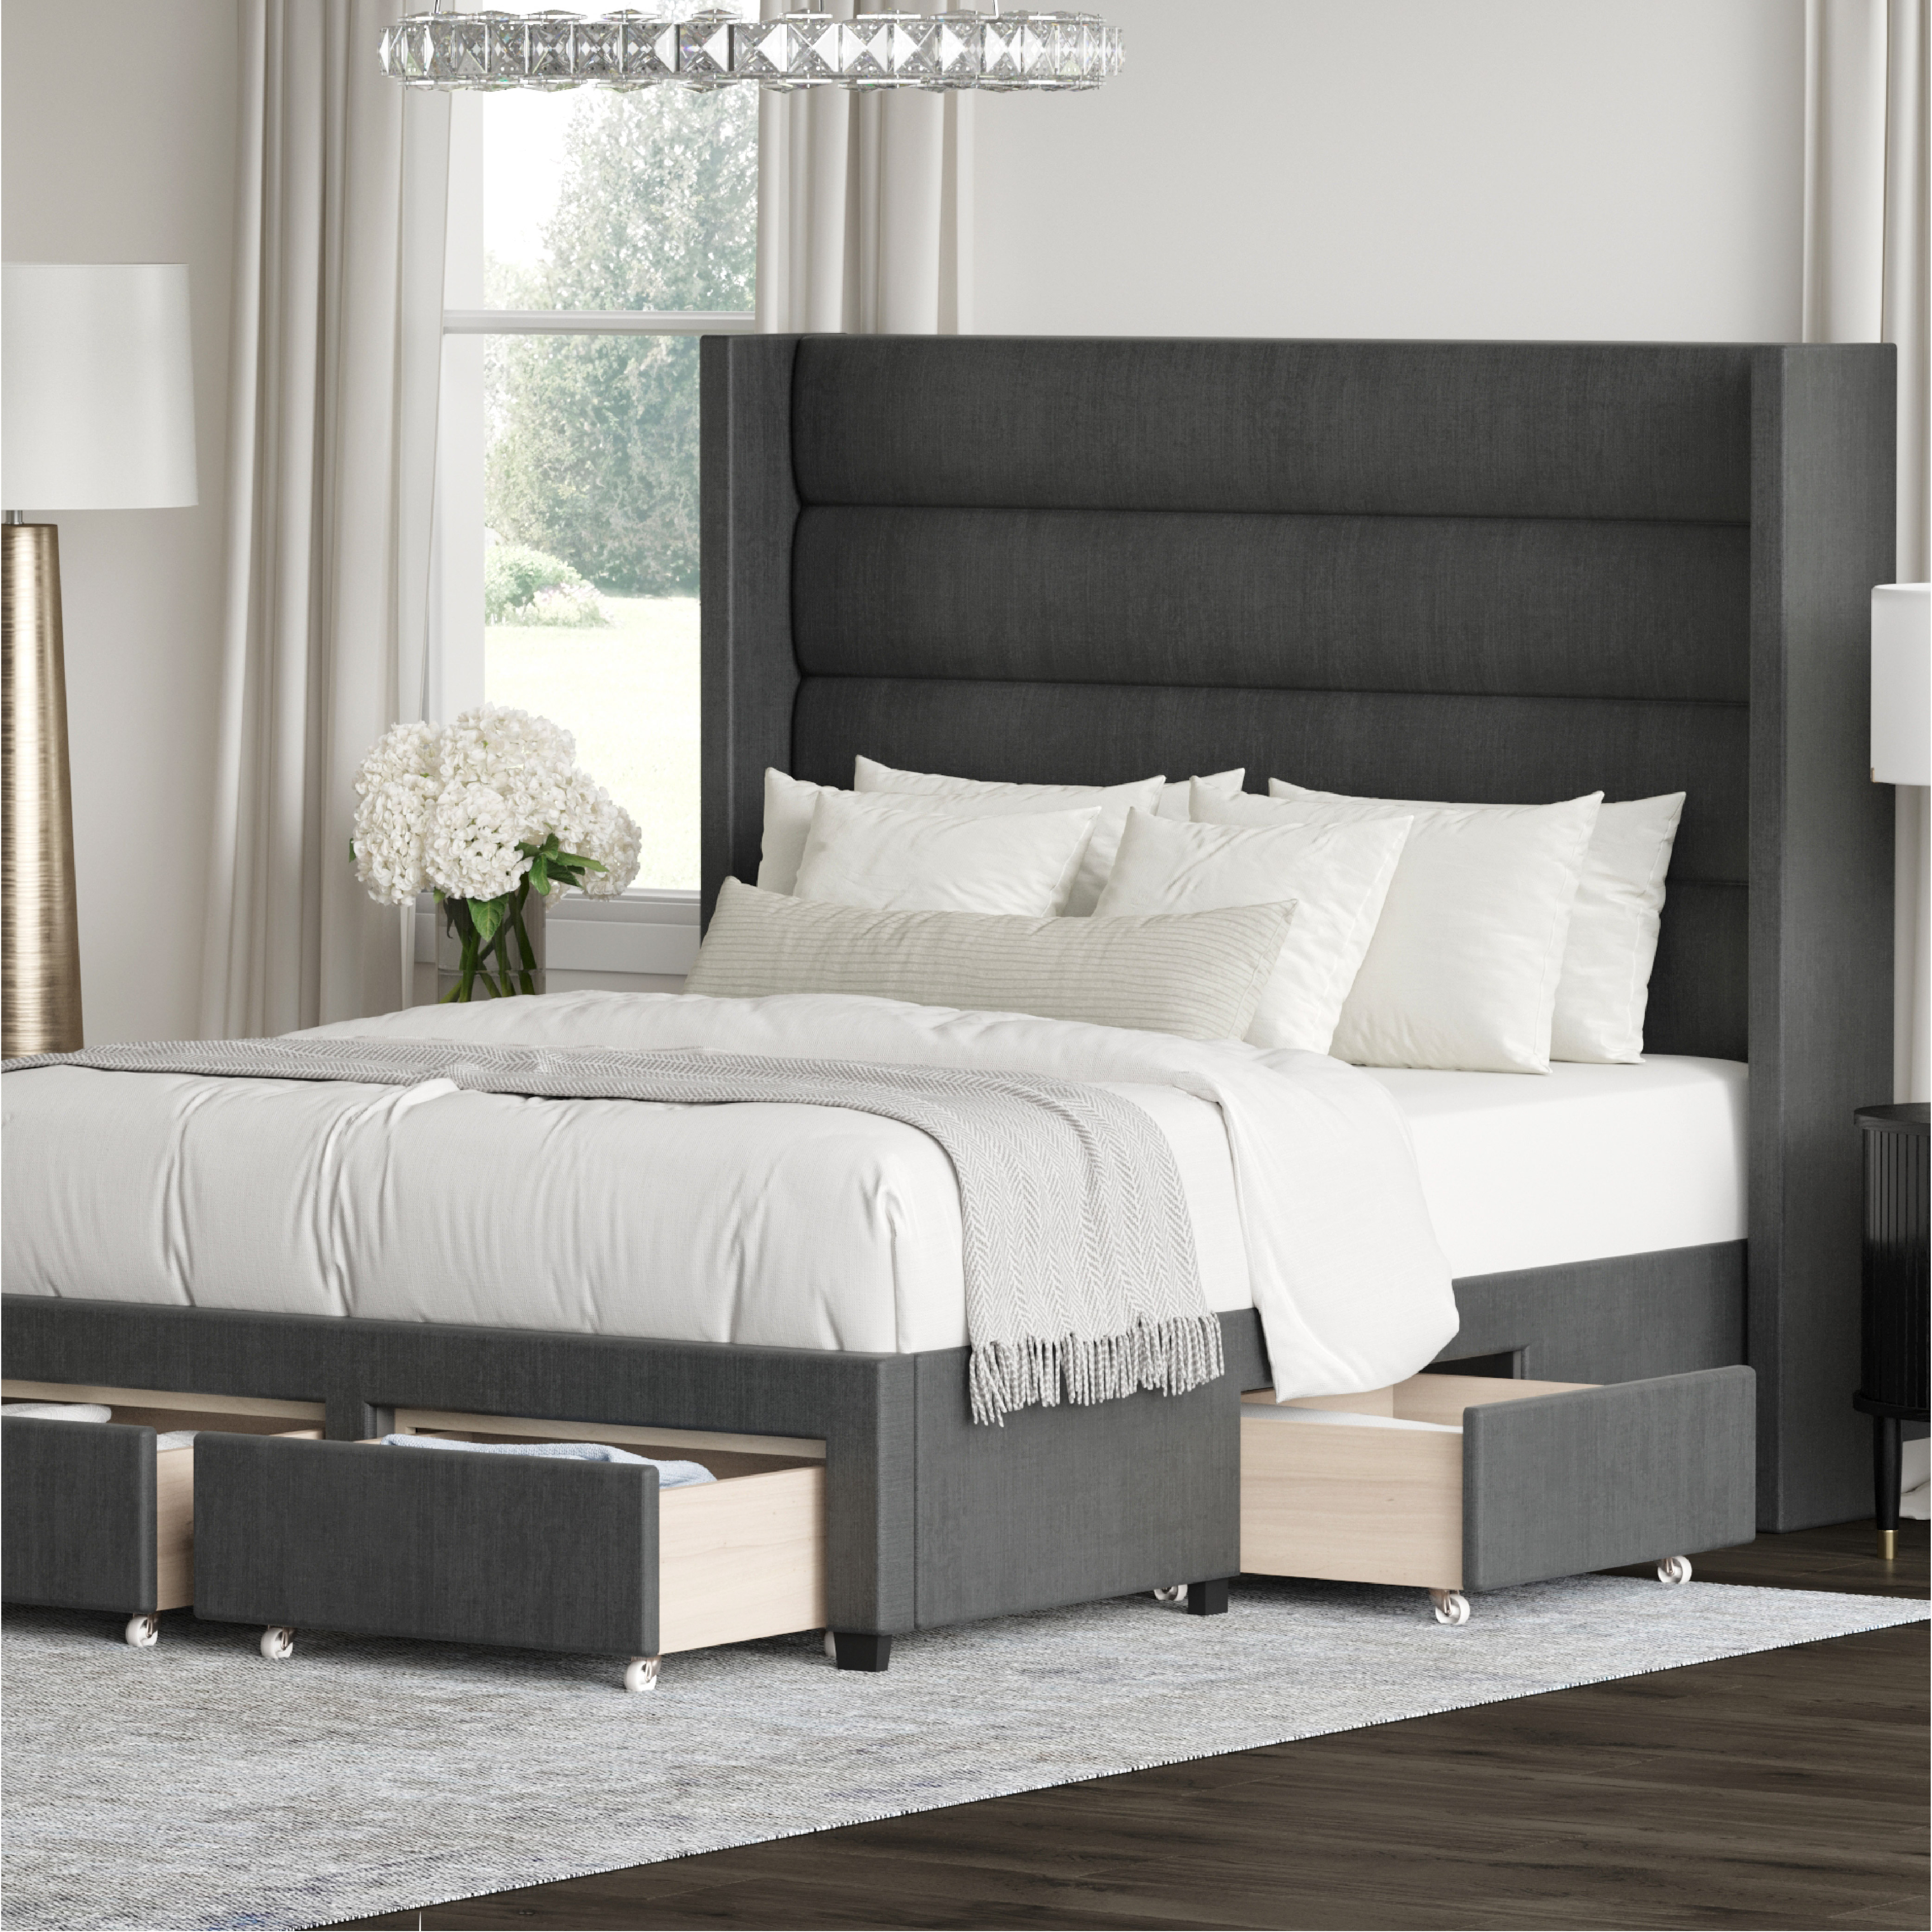 DG Casa George Modern Queen Size Bed Frame - Wooden Platform Bed Frame With Tall Tufted Horizontal Channel Wingback Headboard - Box Spring Needed - Upholstered Panel Bed Frame With Storage - Charcoal - image 3 of 9